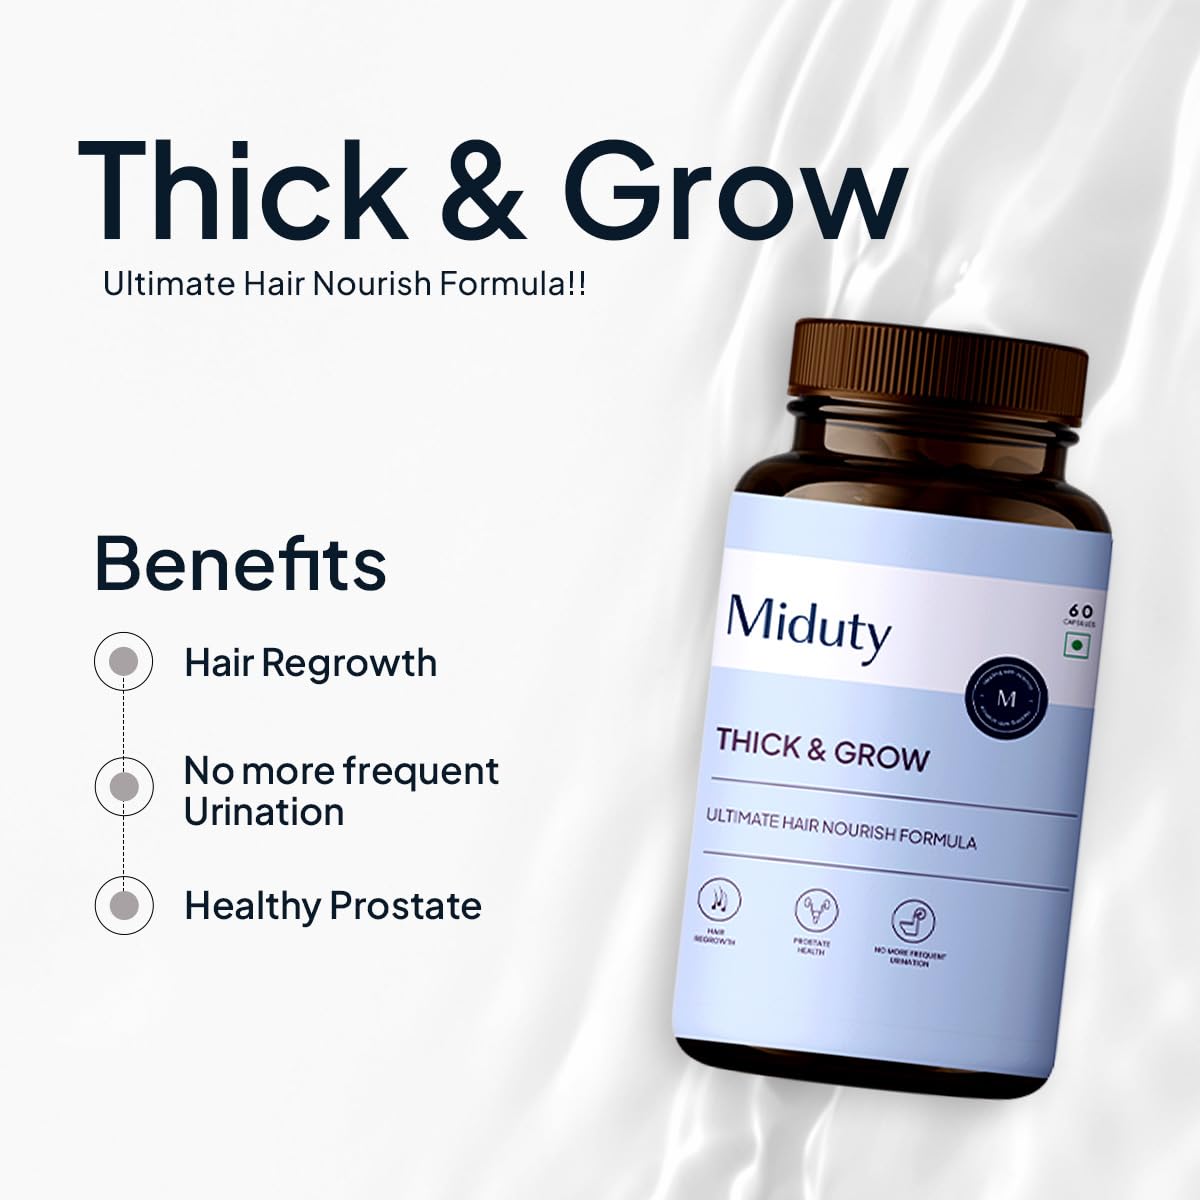 Miduty by Palak Notes Thick and grow, DHT Blockers, Biotin for hair, Essential Amino Acids, L-Cysteistate Health, Frequent Urination Problem - 60 Caps